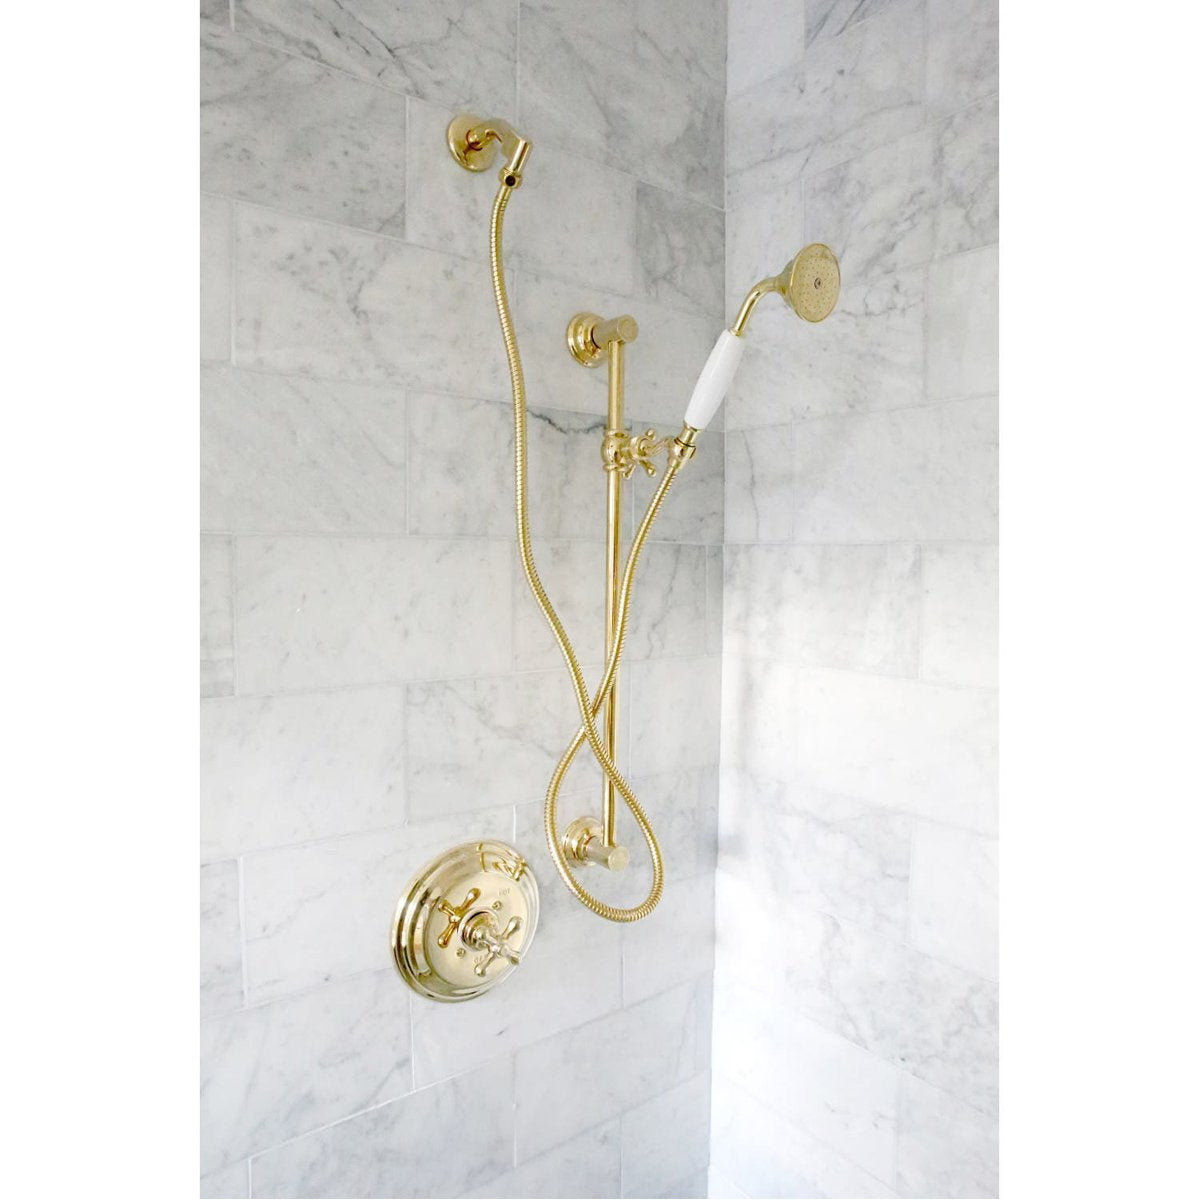 Kingston Brass Wall Mount Shower Only Faucet